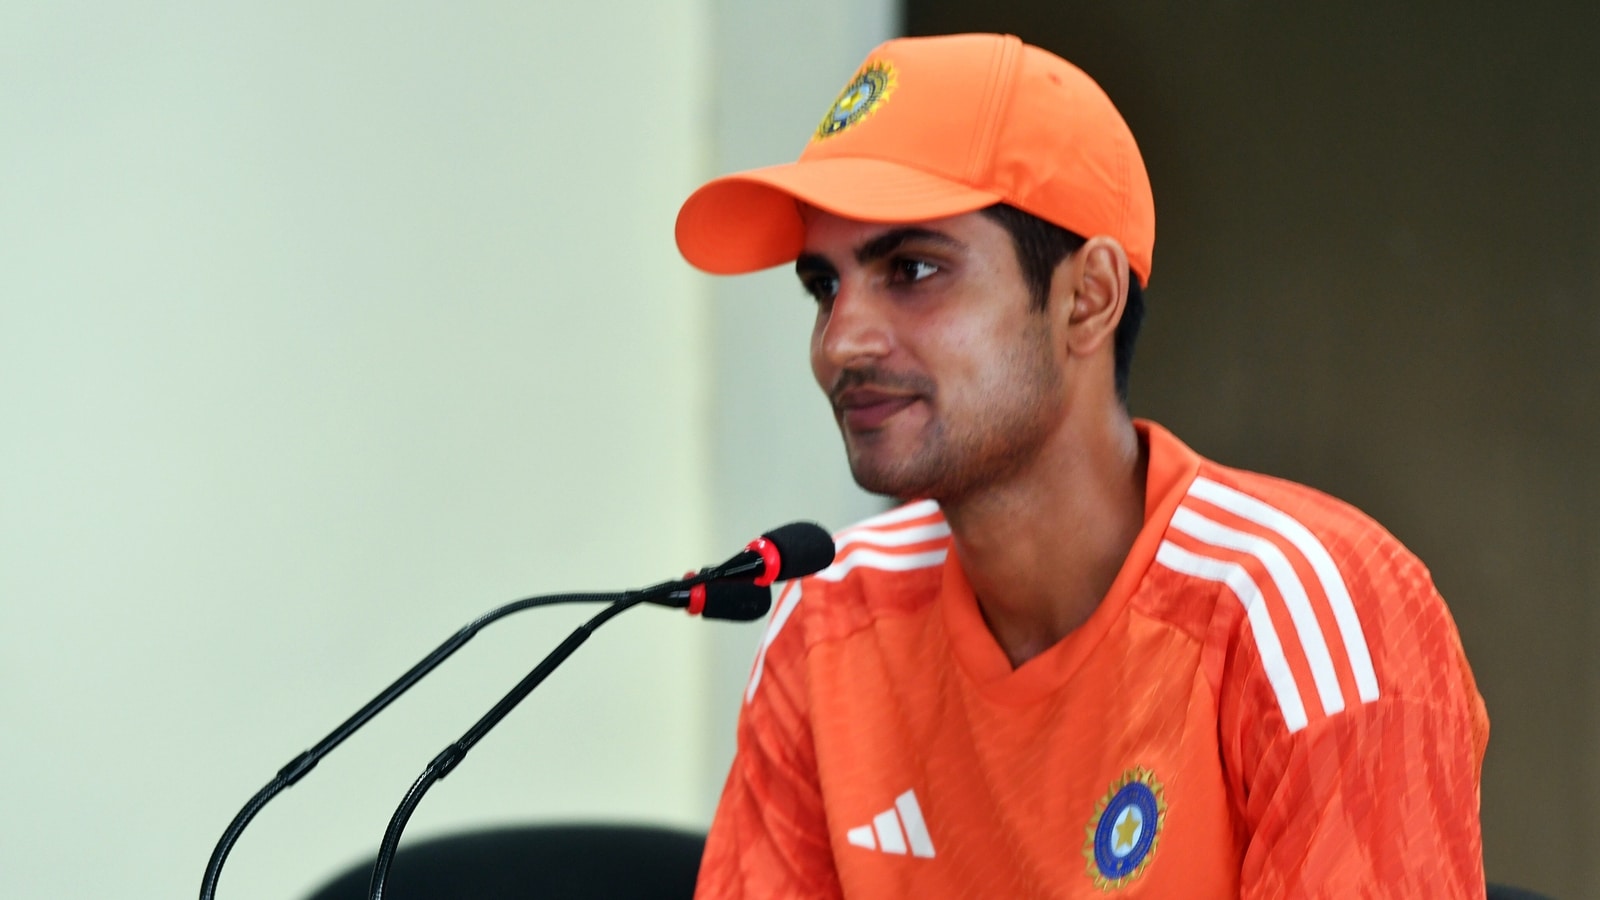 Outside noise didn’t bother me: Shubman Gill ahead of 4th Test against England